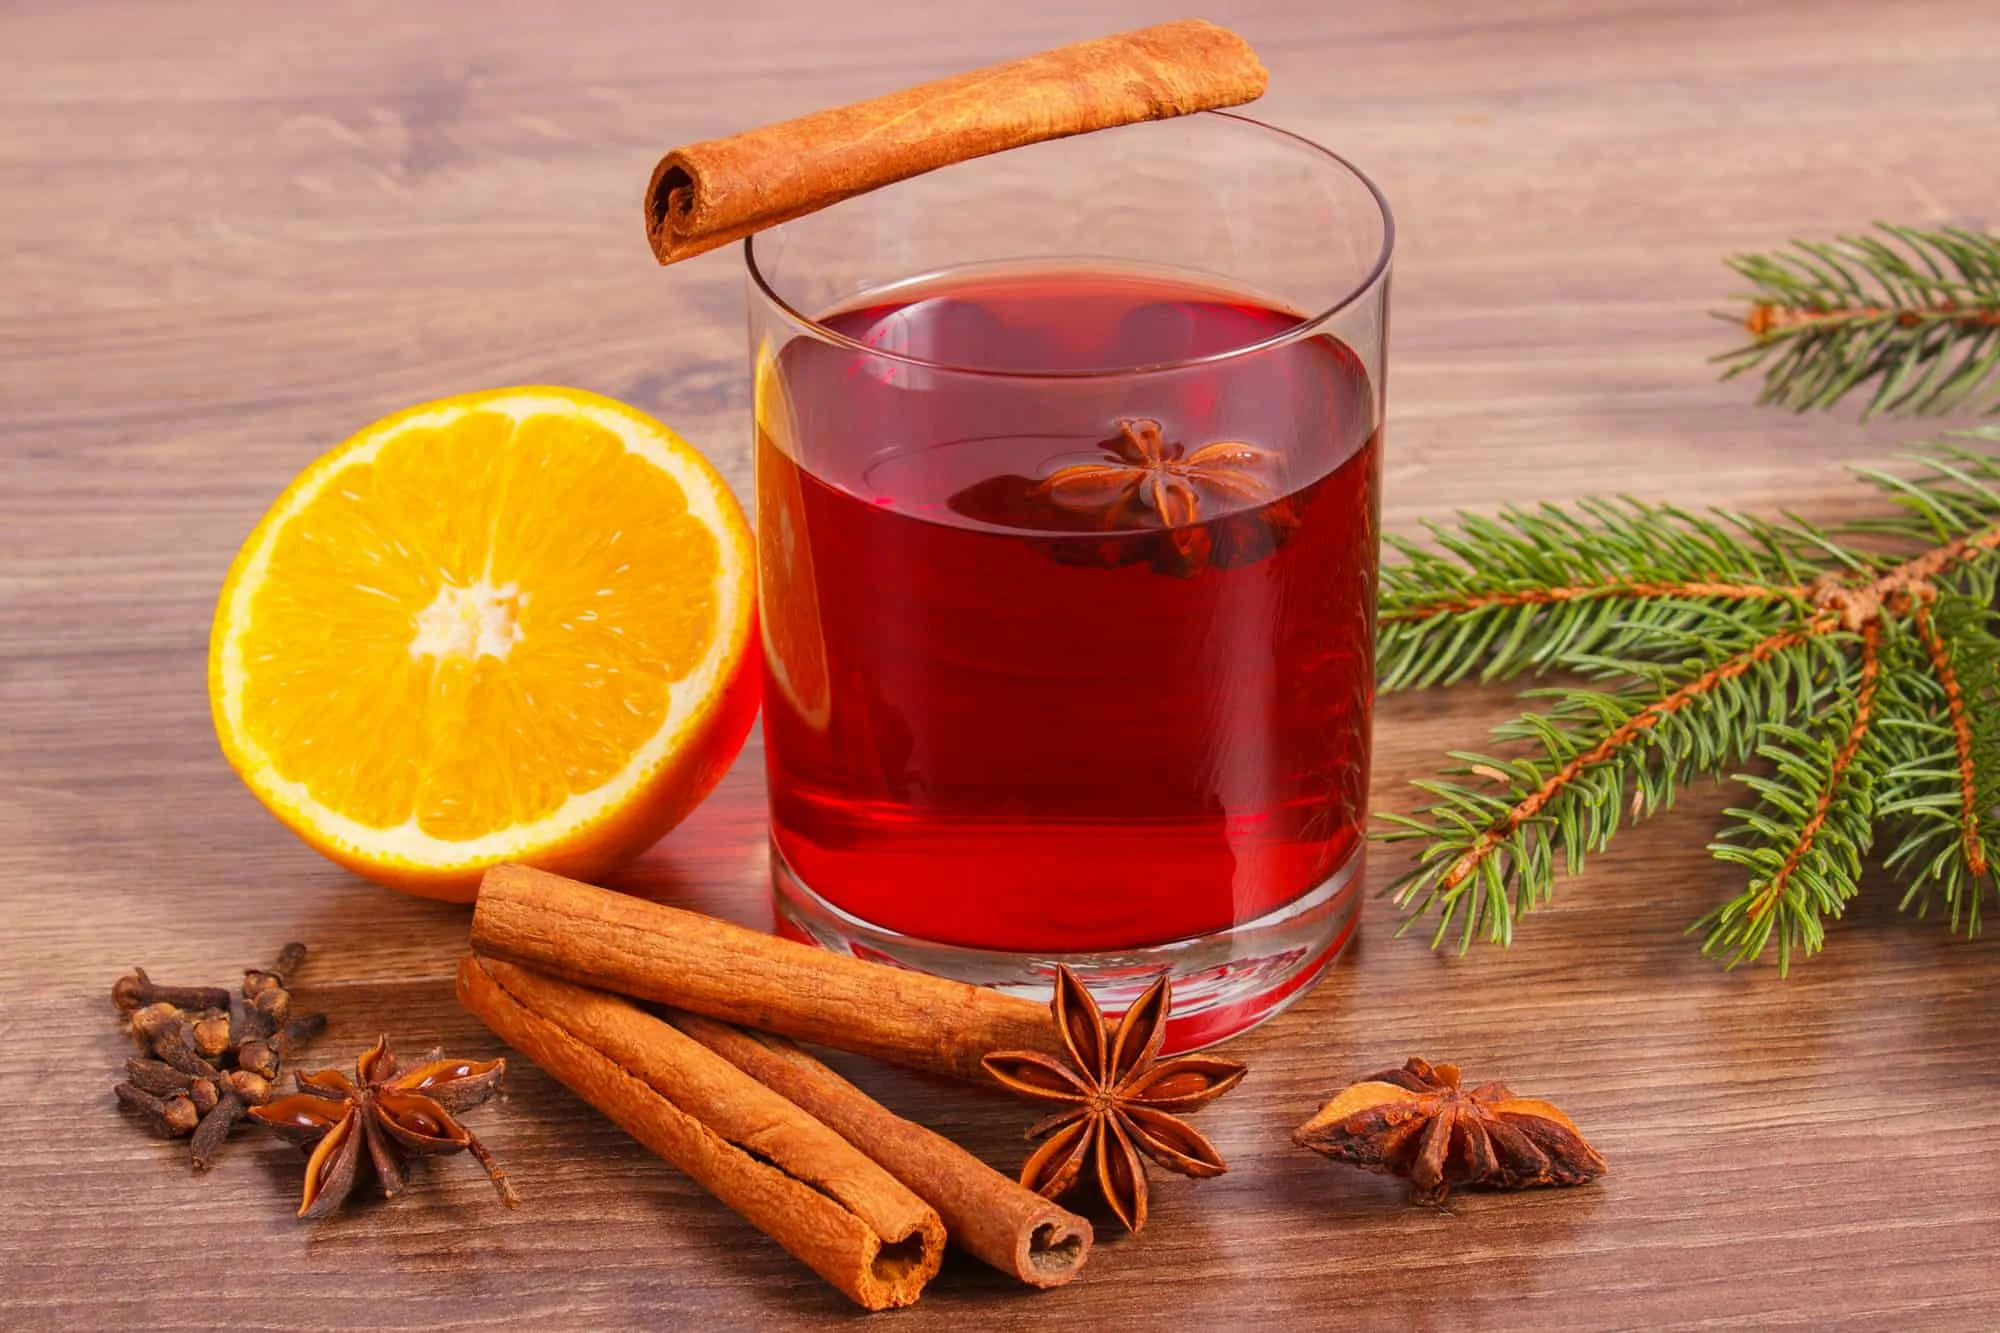 Mulled wine for christmas or winter evening with spices and spruce branches